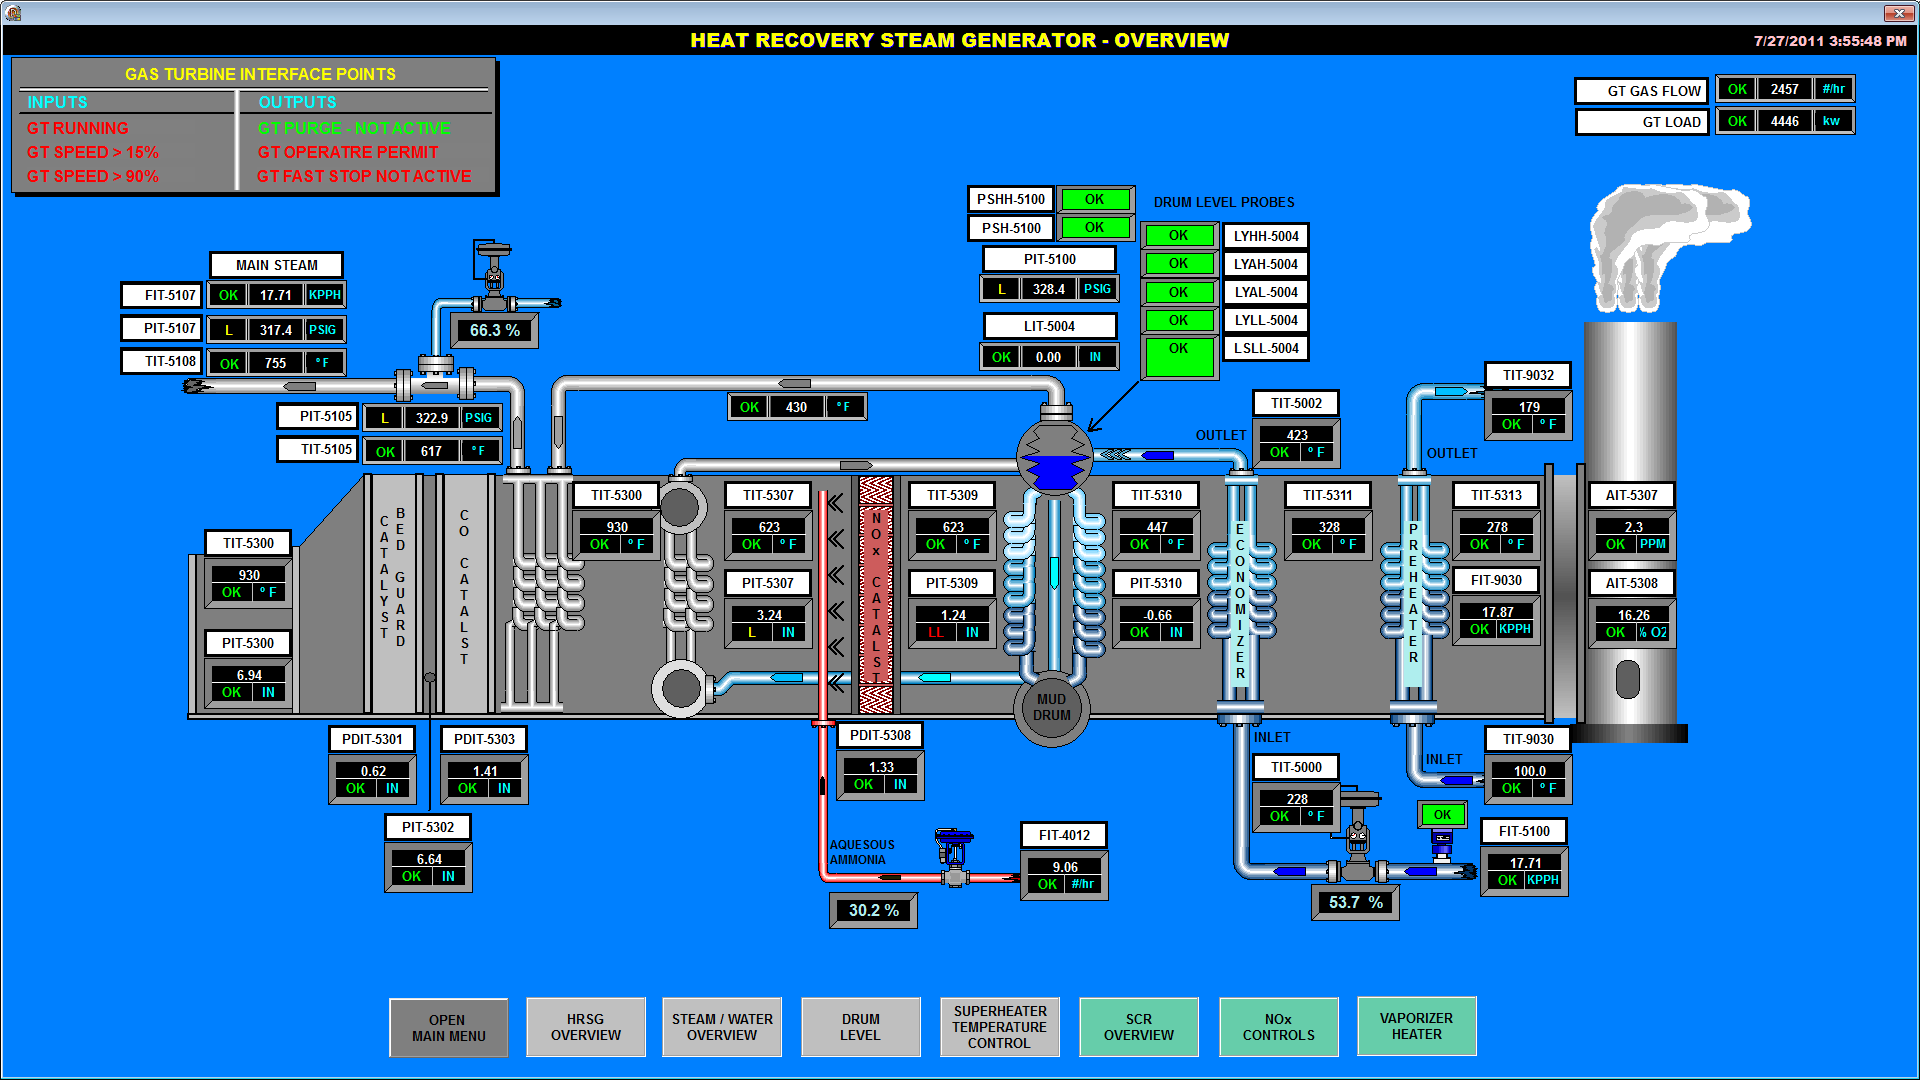 HRSG_Overview.png